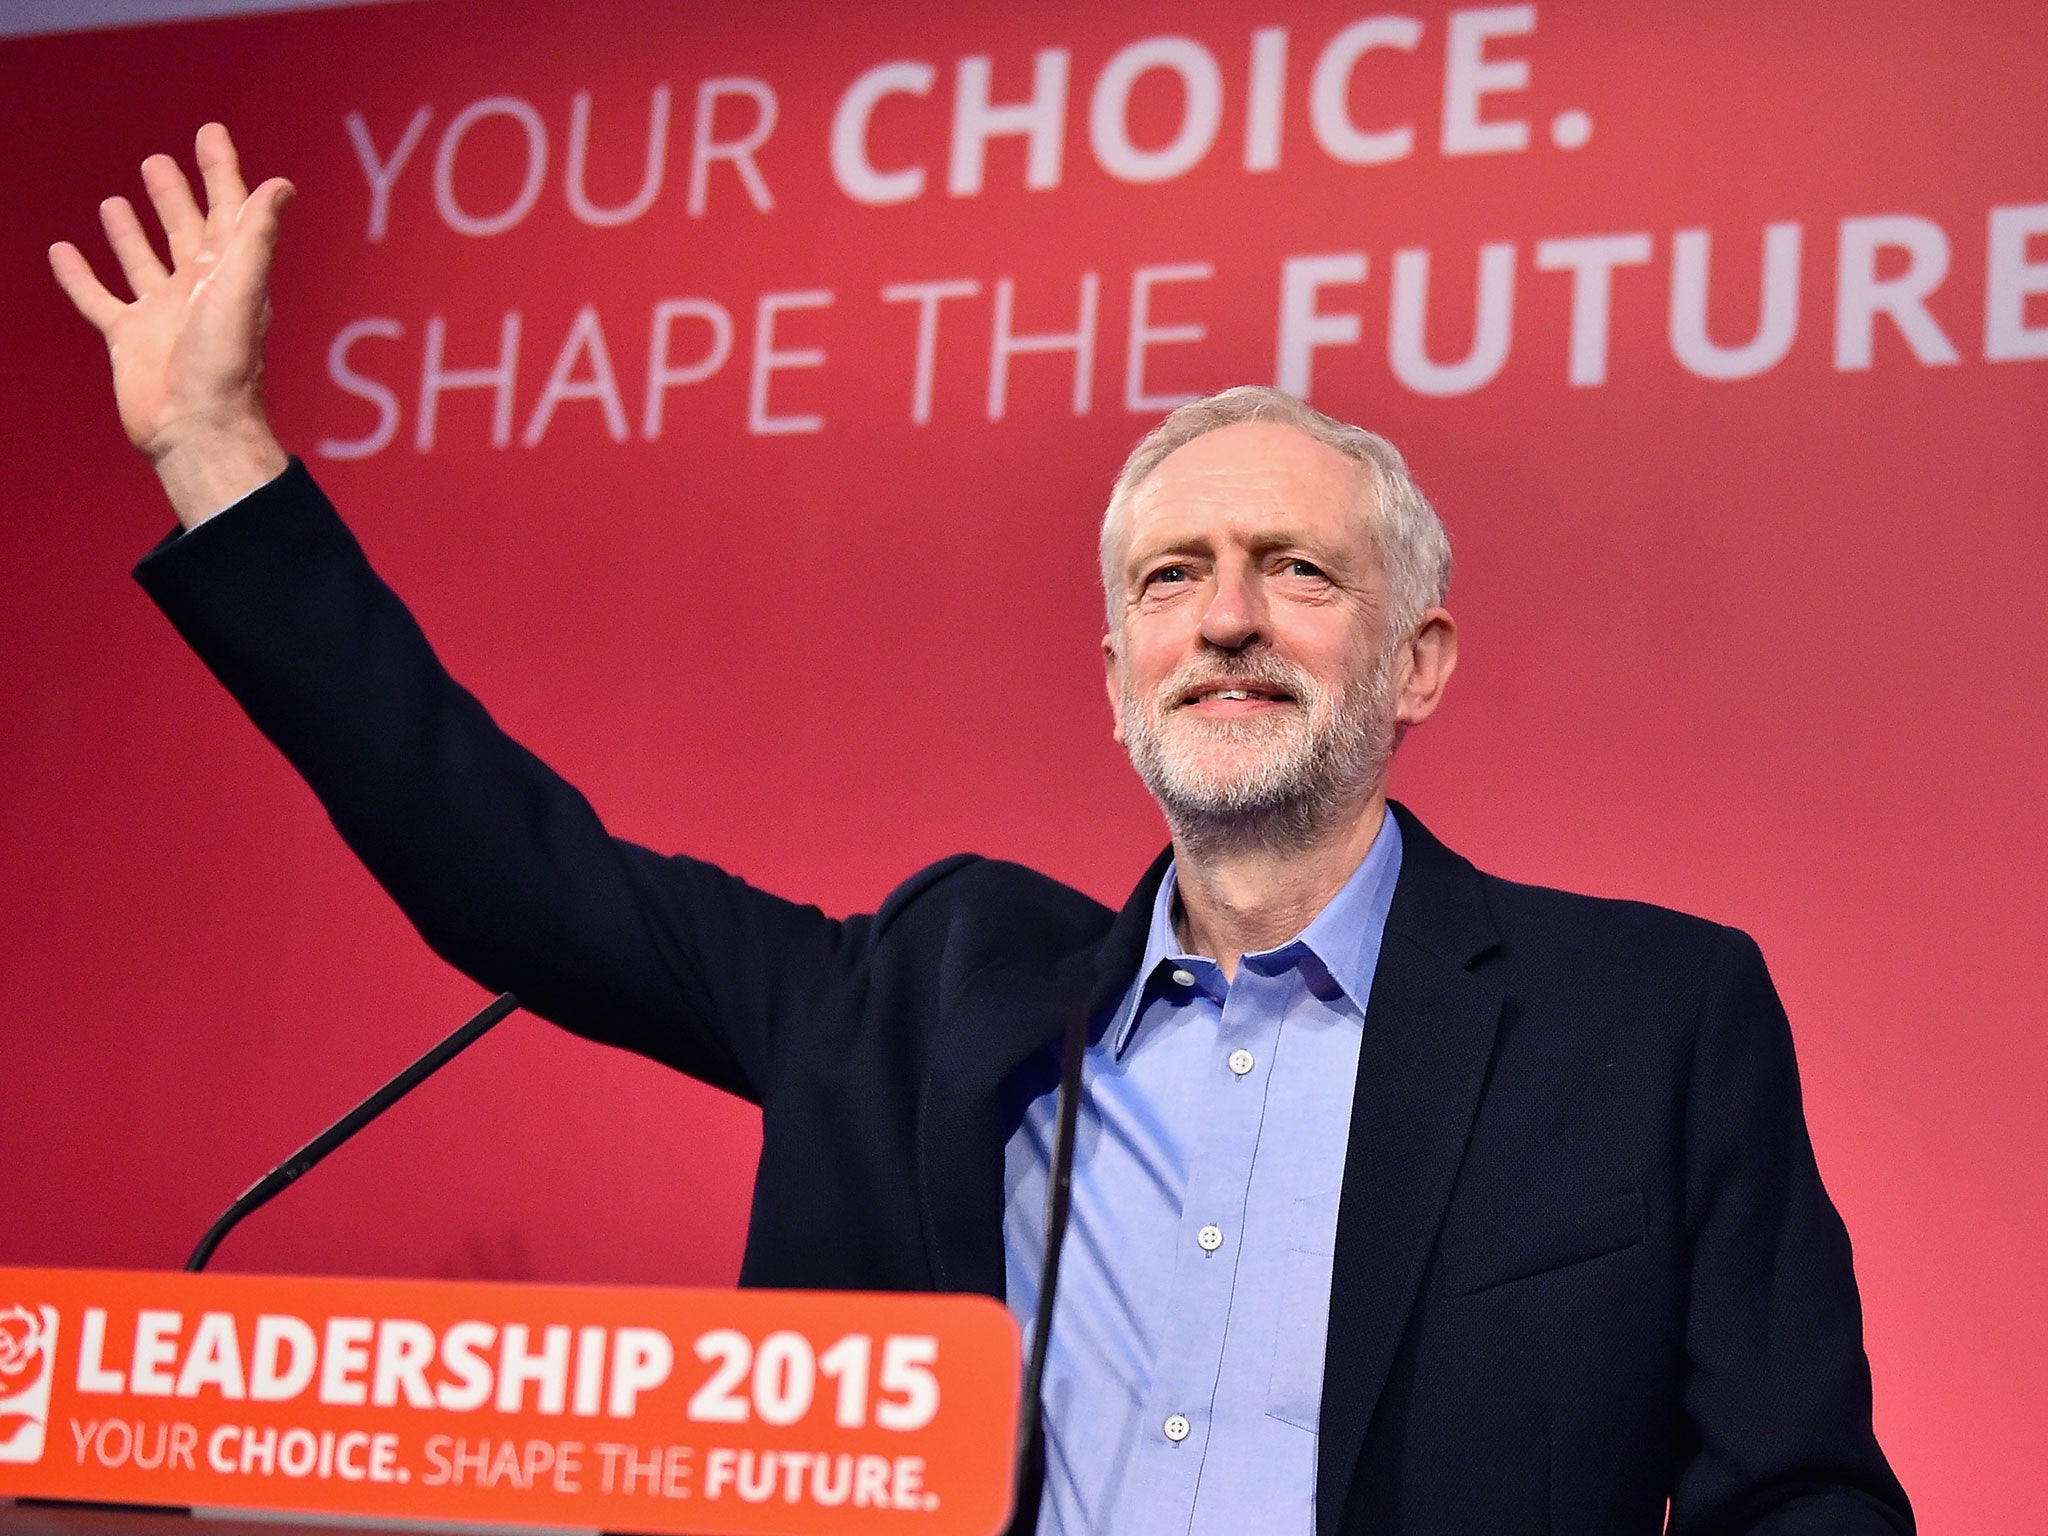 Jeremy Corbyn won a landslide victory over his rivals